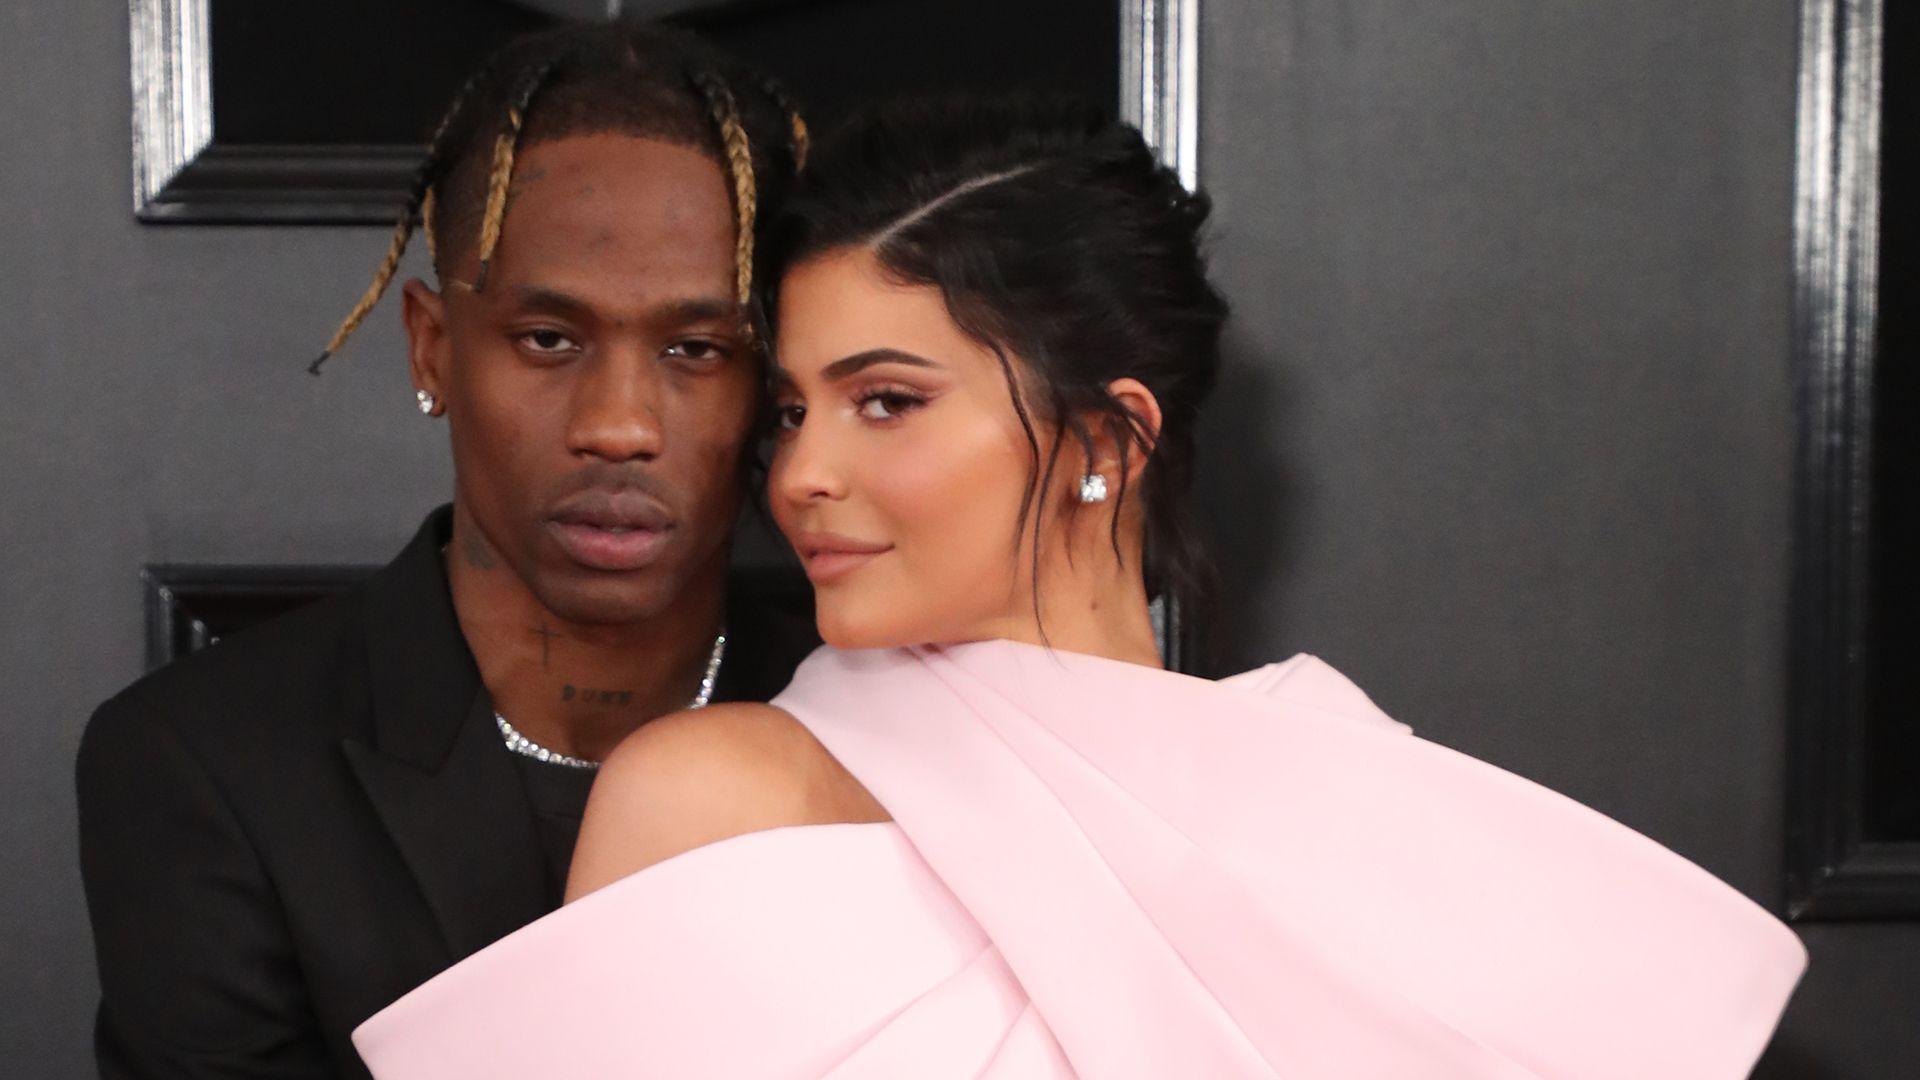 Kylie Jenner & Travis Scott New Baby? The Couple Says Yes